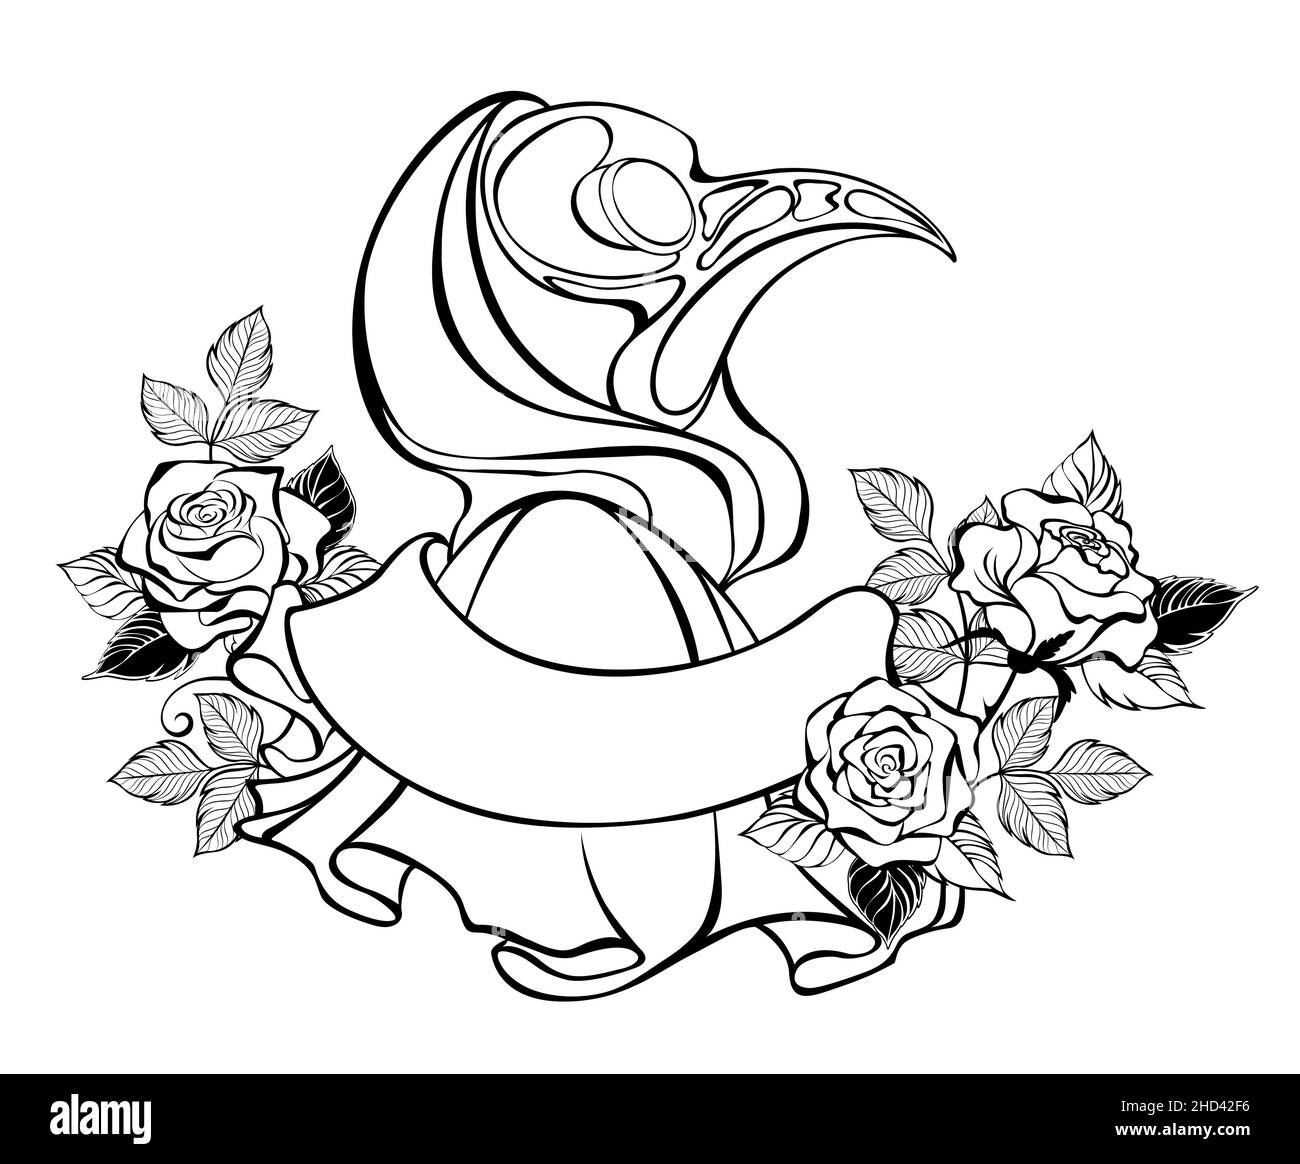 Contour, art drawing of plague doctor wearing cap with blooming roses, on white background. Design on halloween. Stock Vector